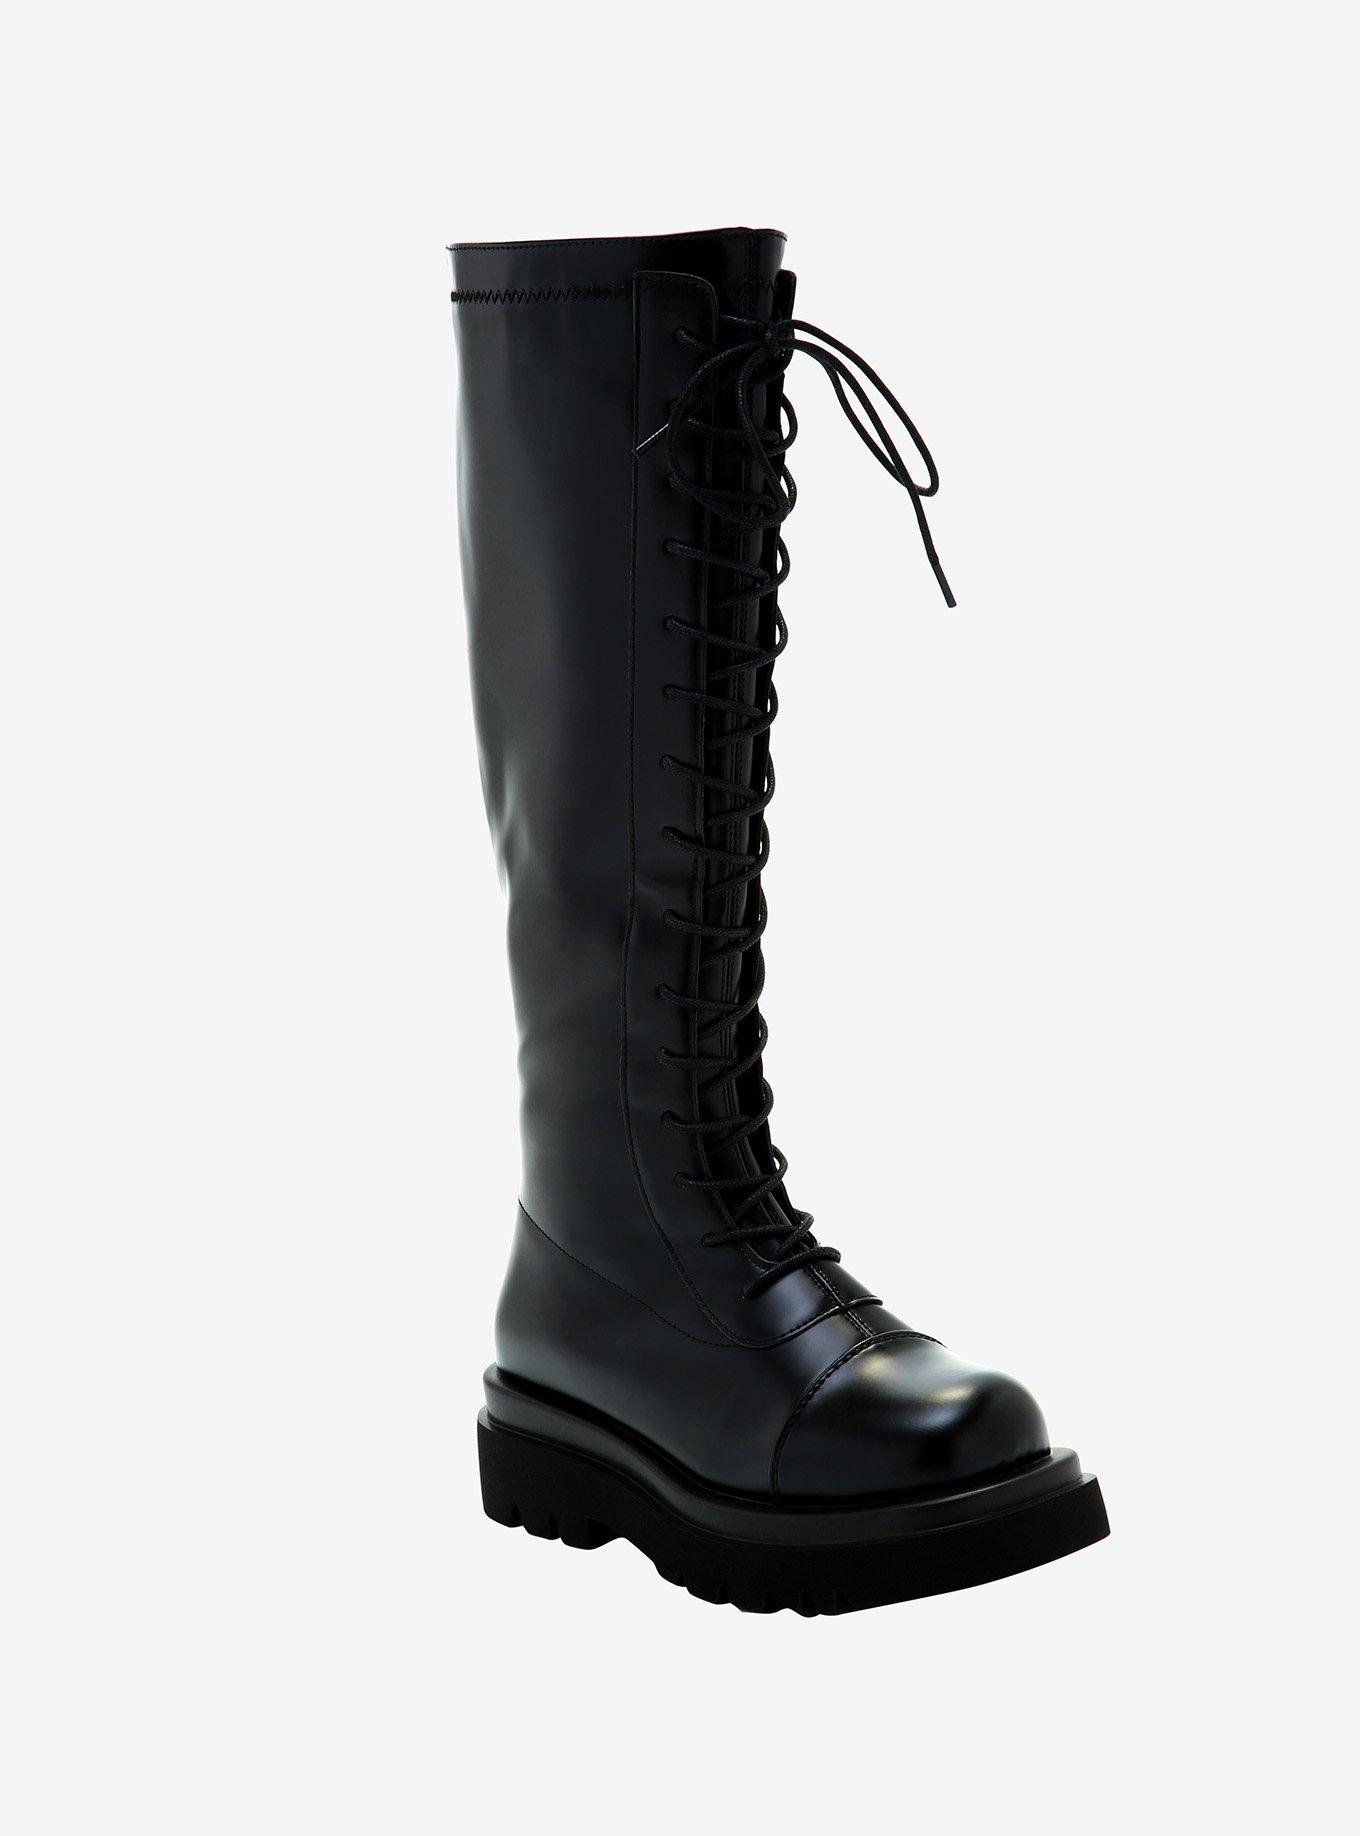 Black Lace Platform Knee-High Boots | Hot Topic